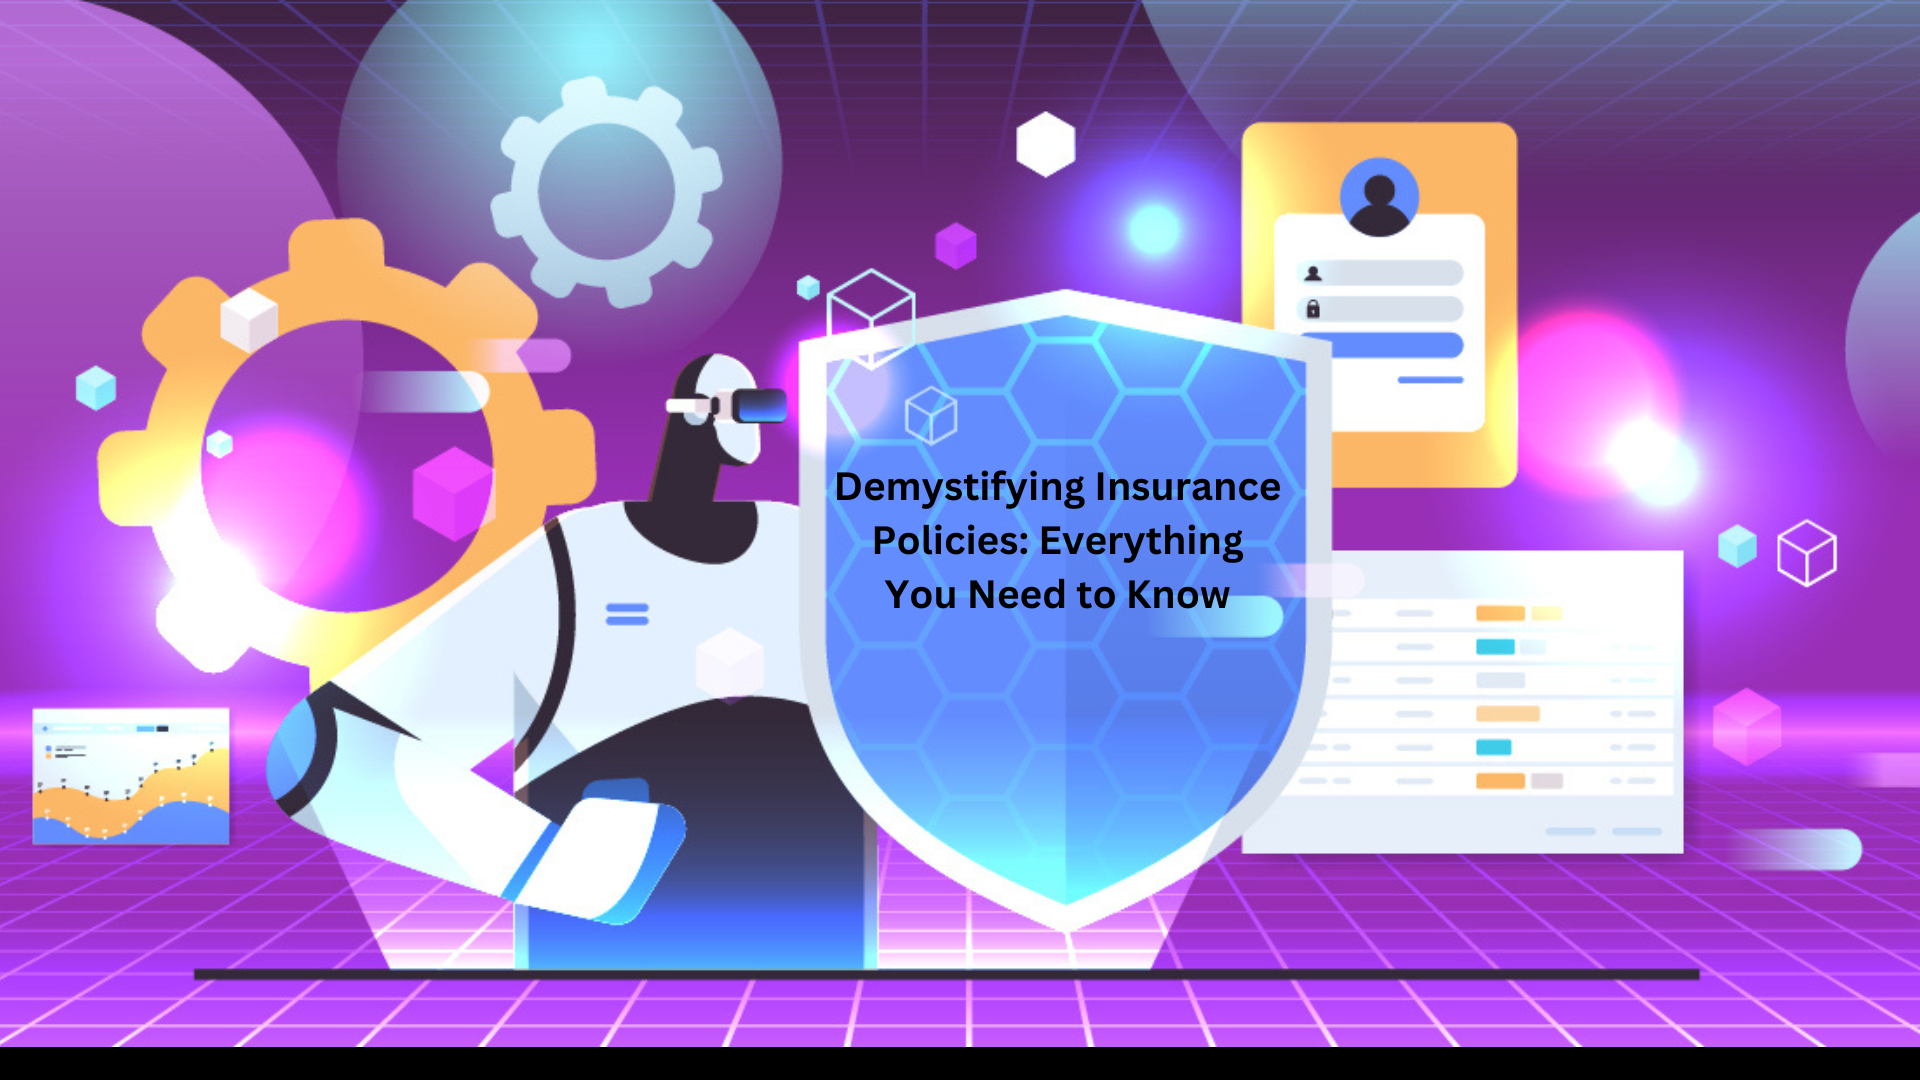 Demystifying Insurance Policies: Everything You Need to Know